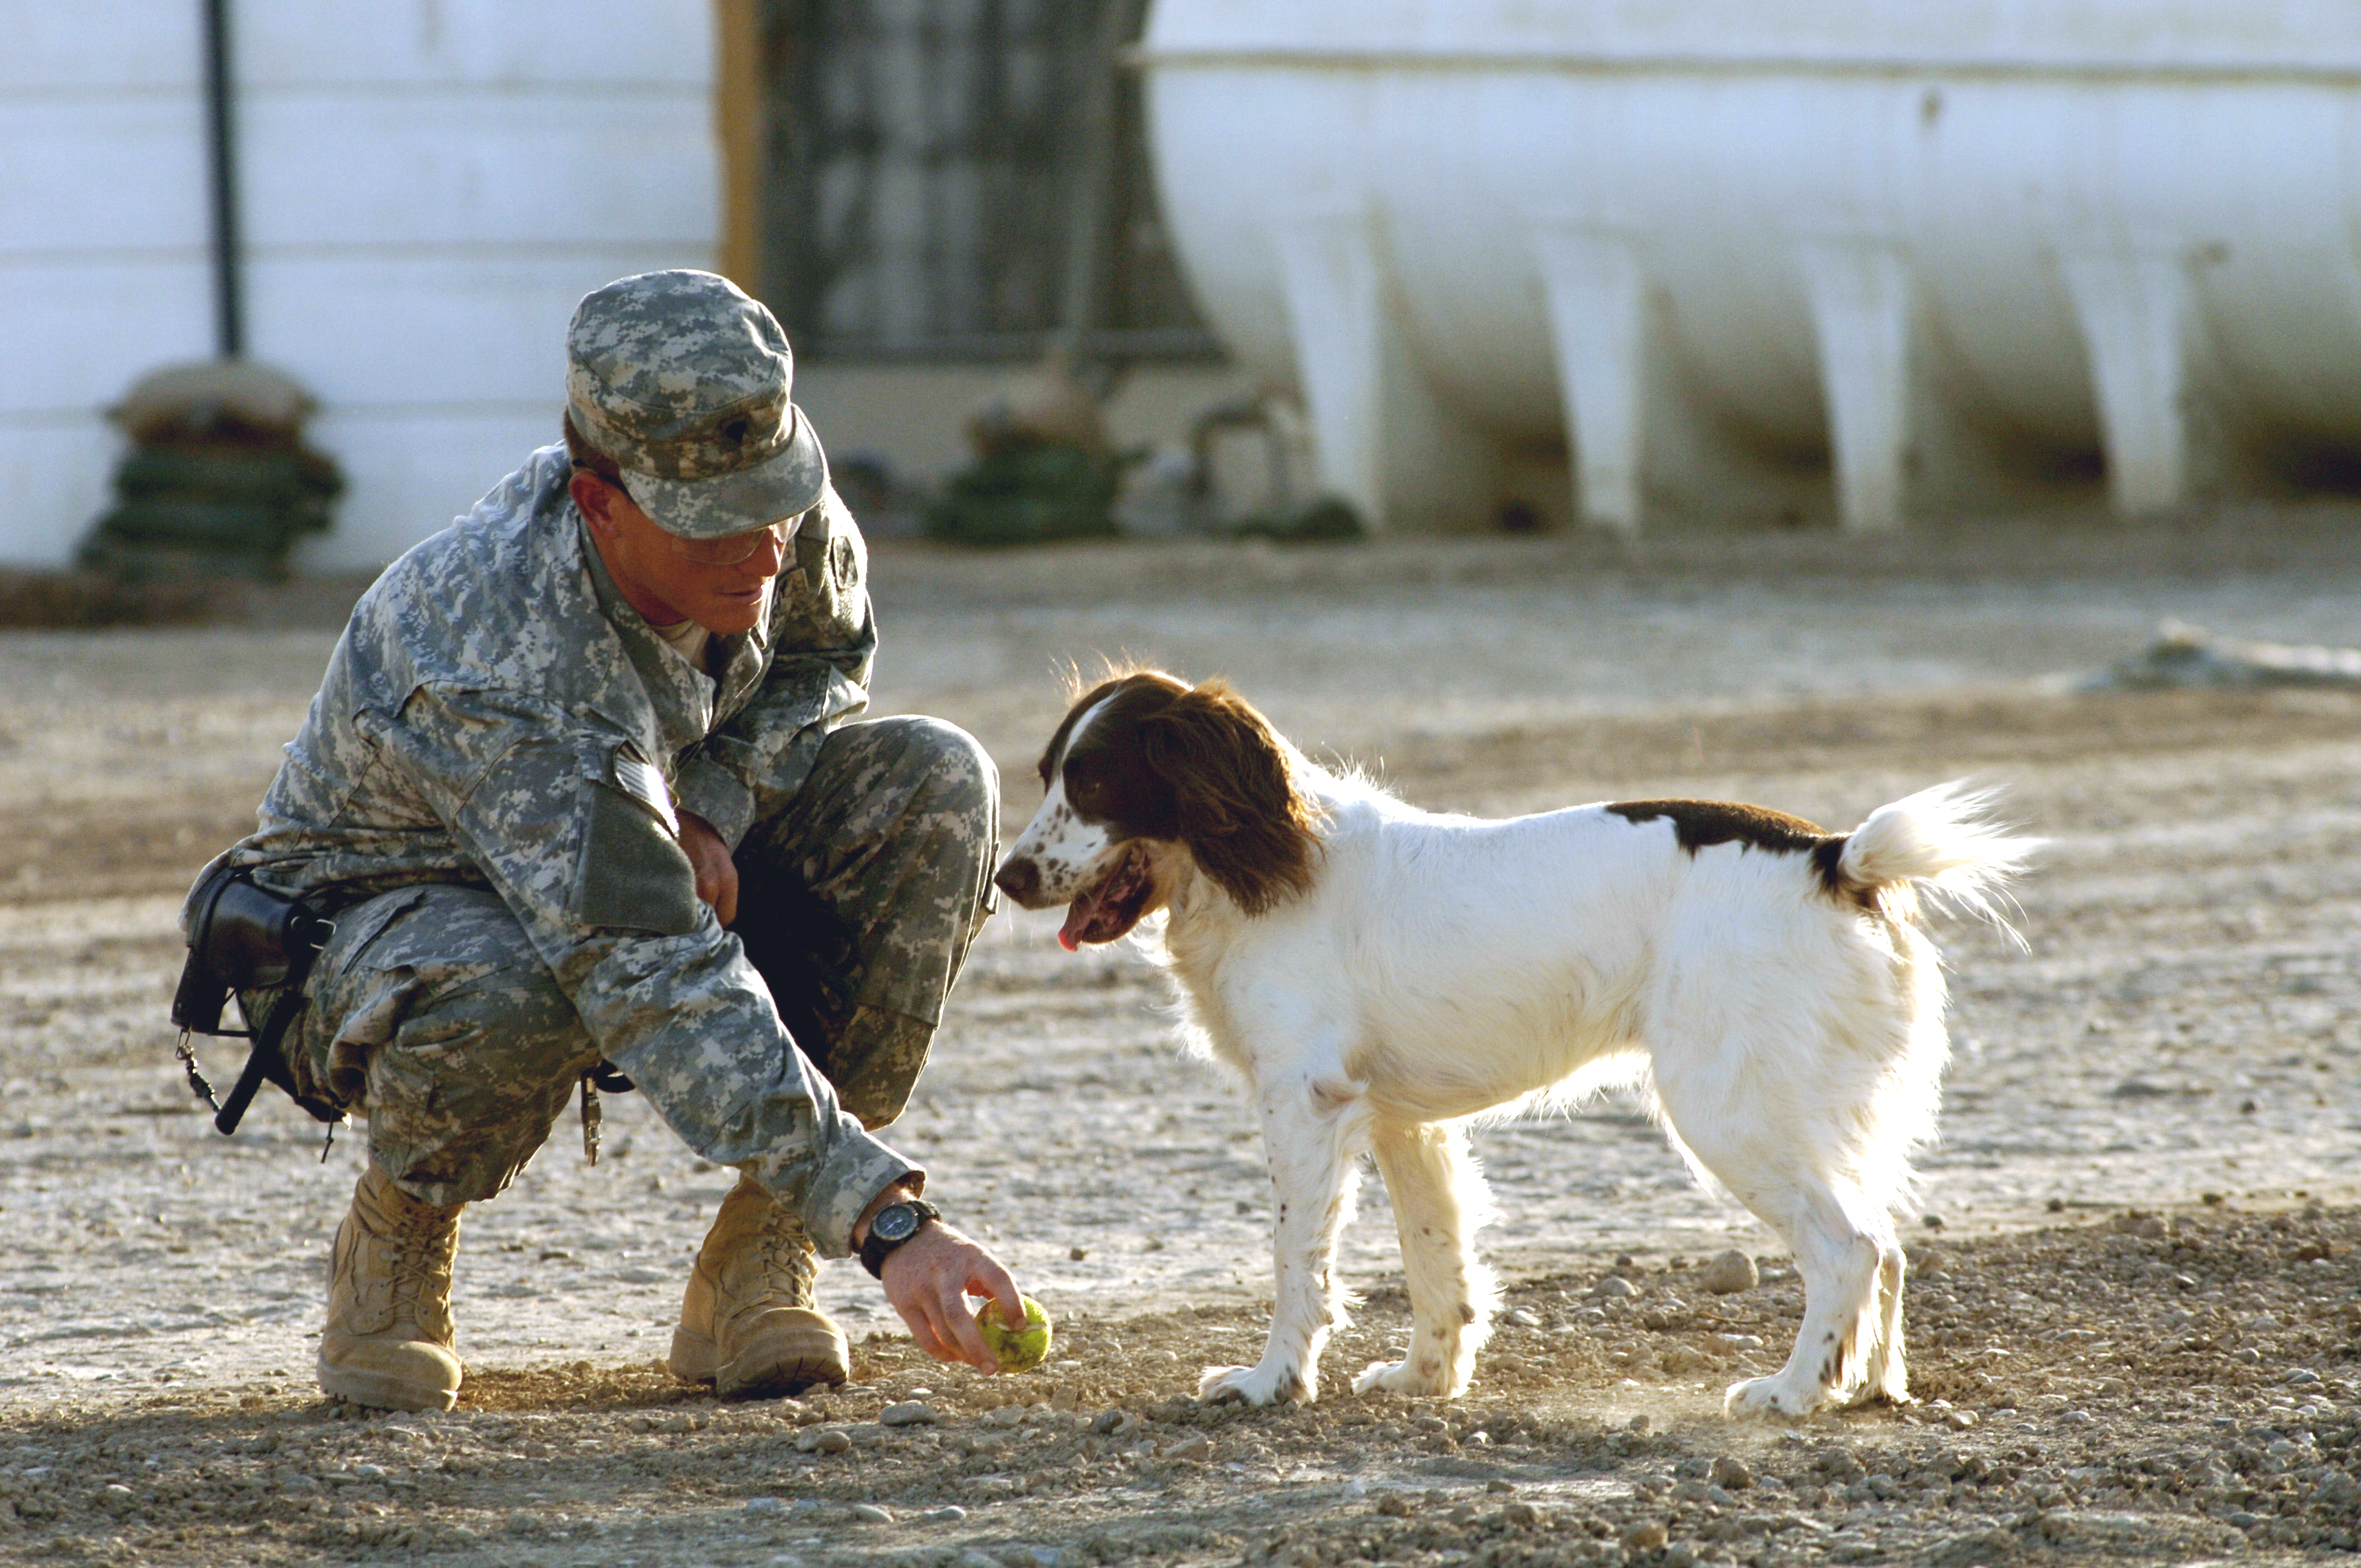 DefenseLink Special: Military Working Dogs